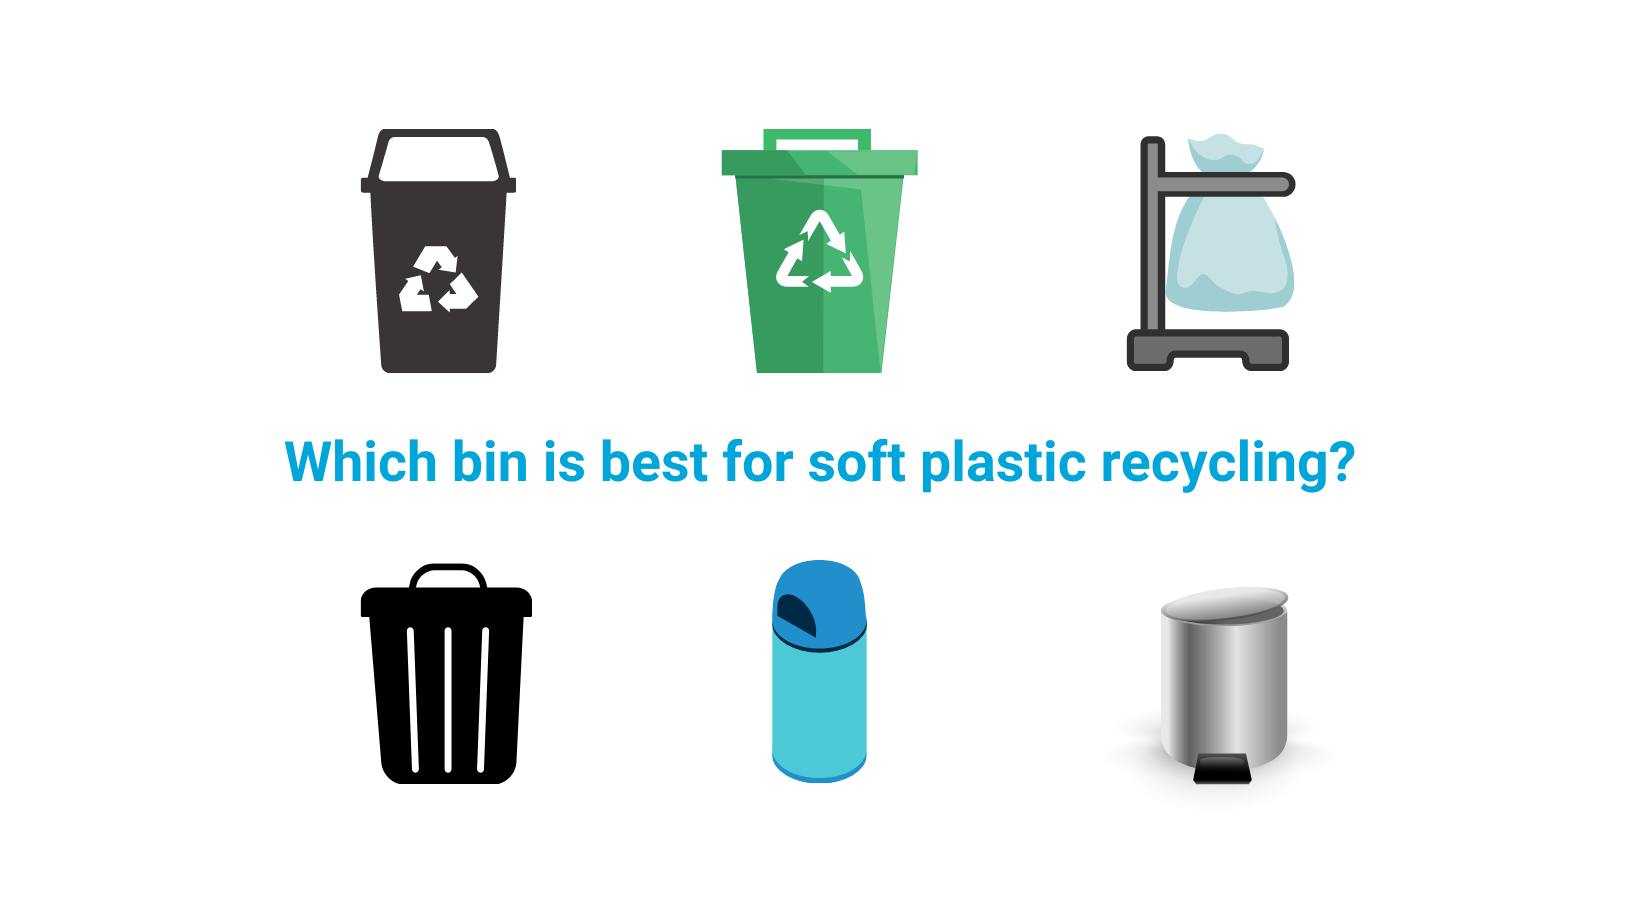 What is the best bin for soft plastic recycling?